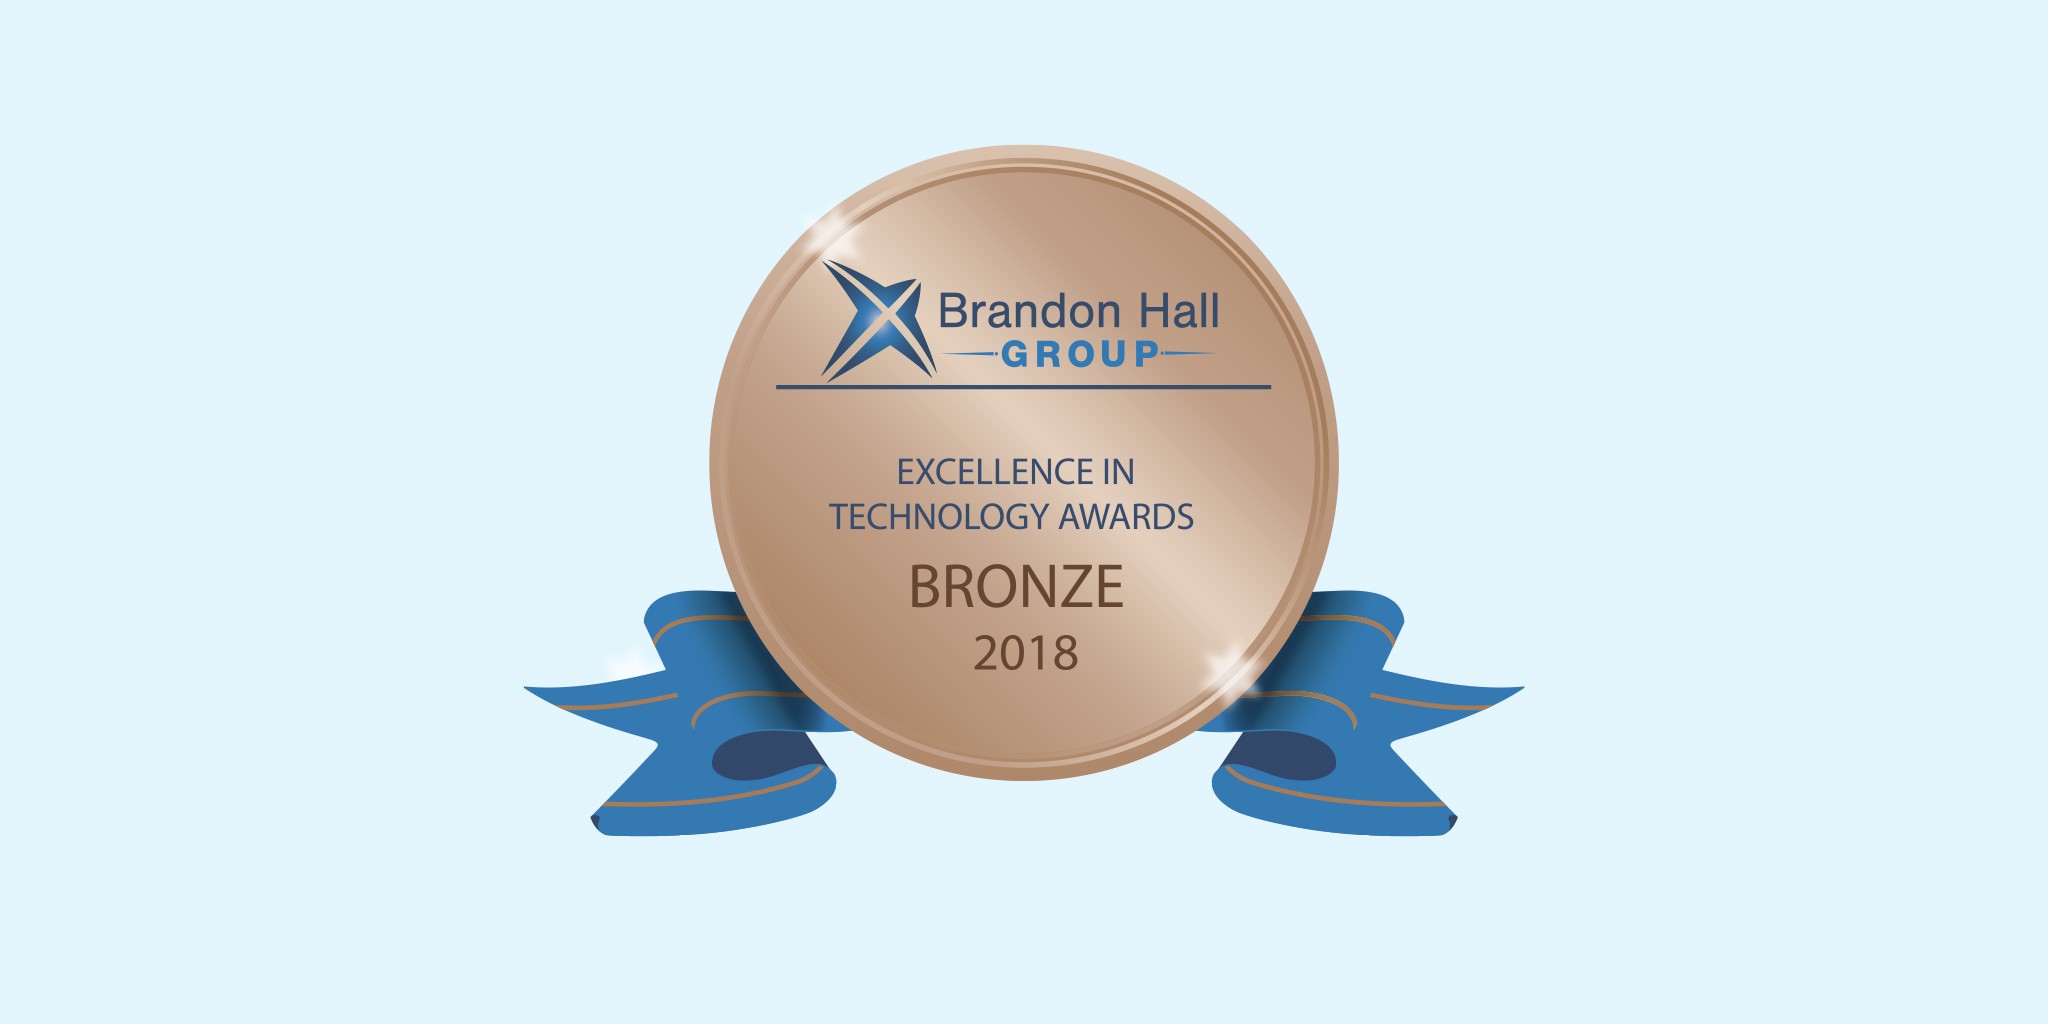 Brandon Hall group excellence in technology awards bronze 2018